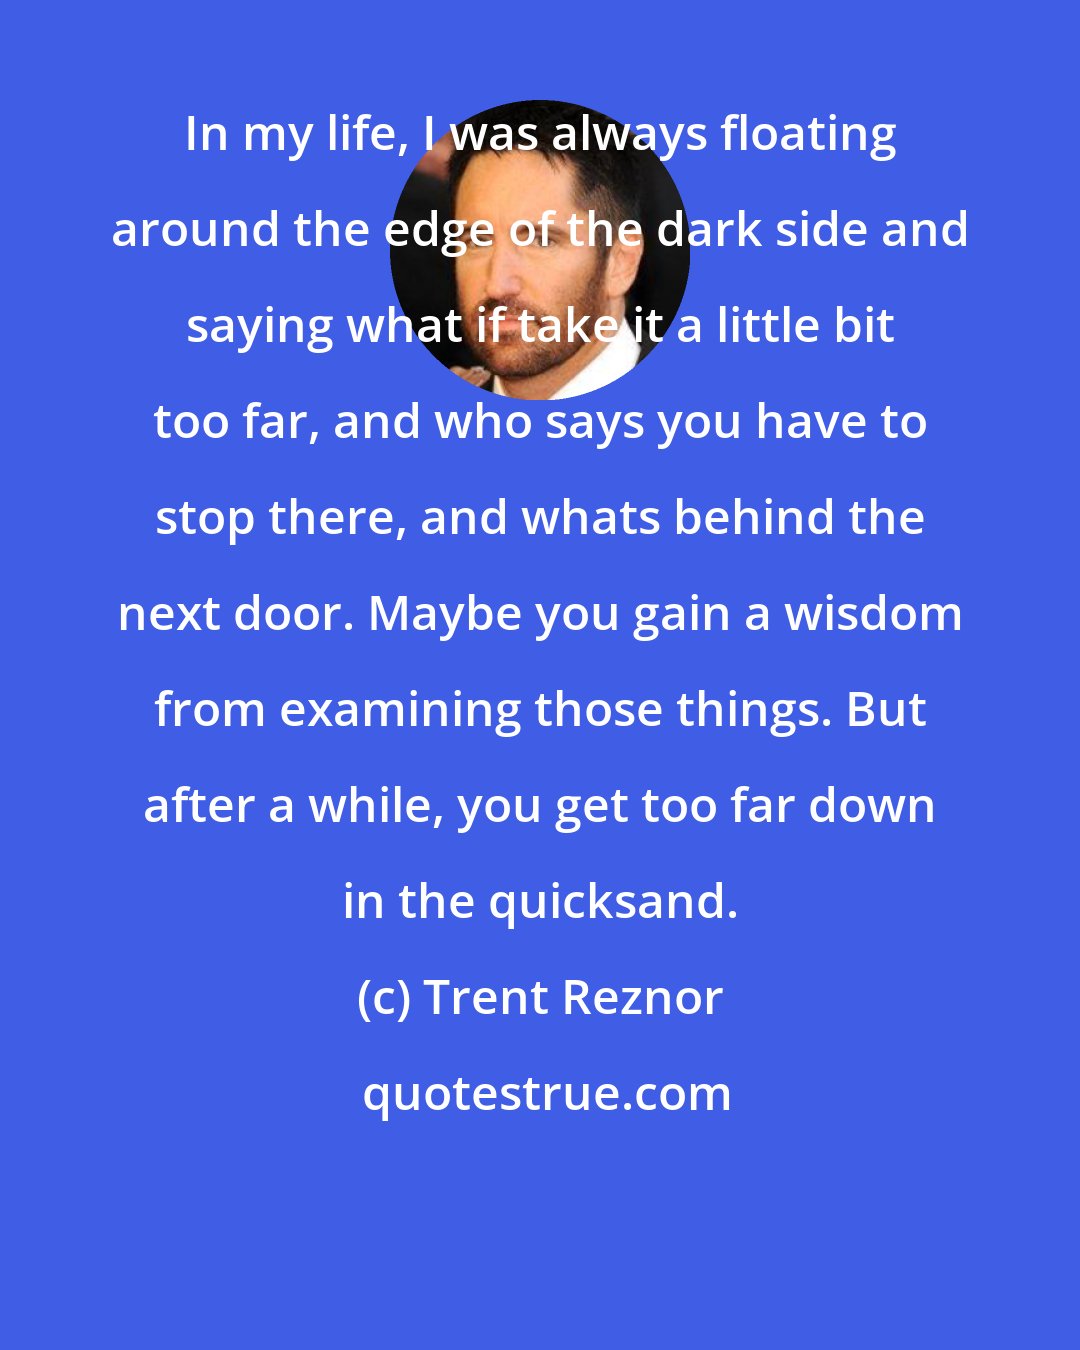 Trent Reznor: In my life, I was always floating around the edge of the dark side and saying what if take it a little bit too far, and who says you have to stop there, and whats behind the next door. Maybe you gain a wisdom from examining those things. But after a while, you get too far down in the quicksand.